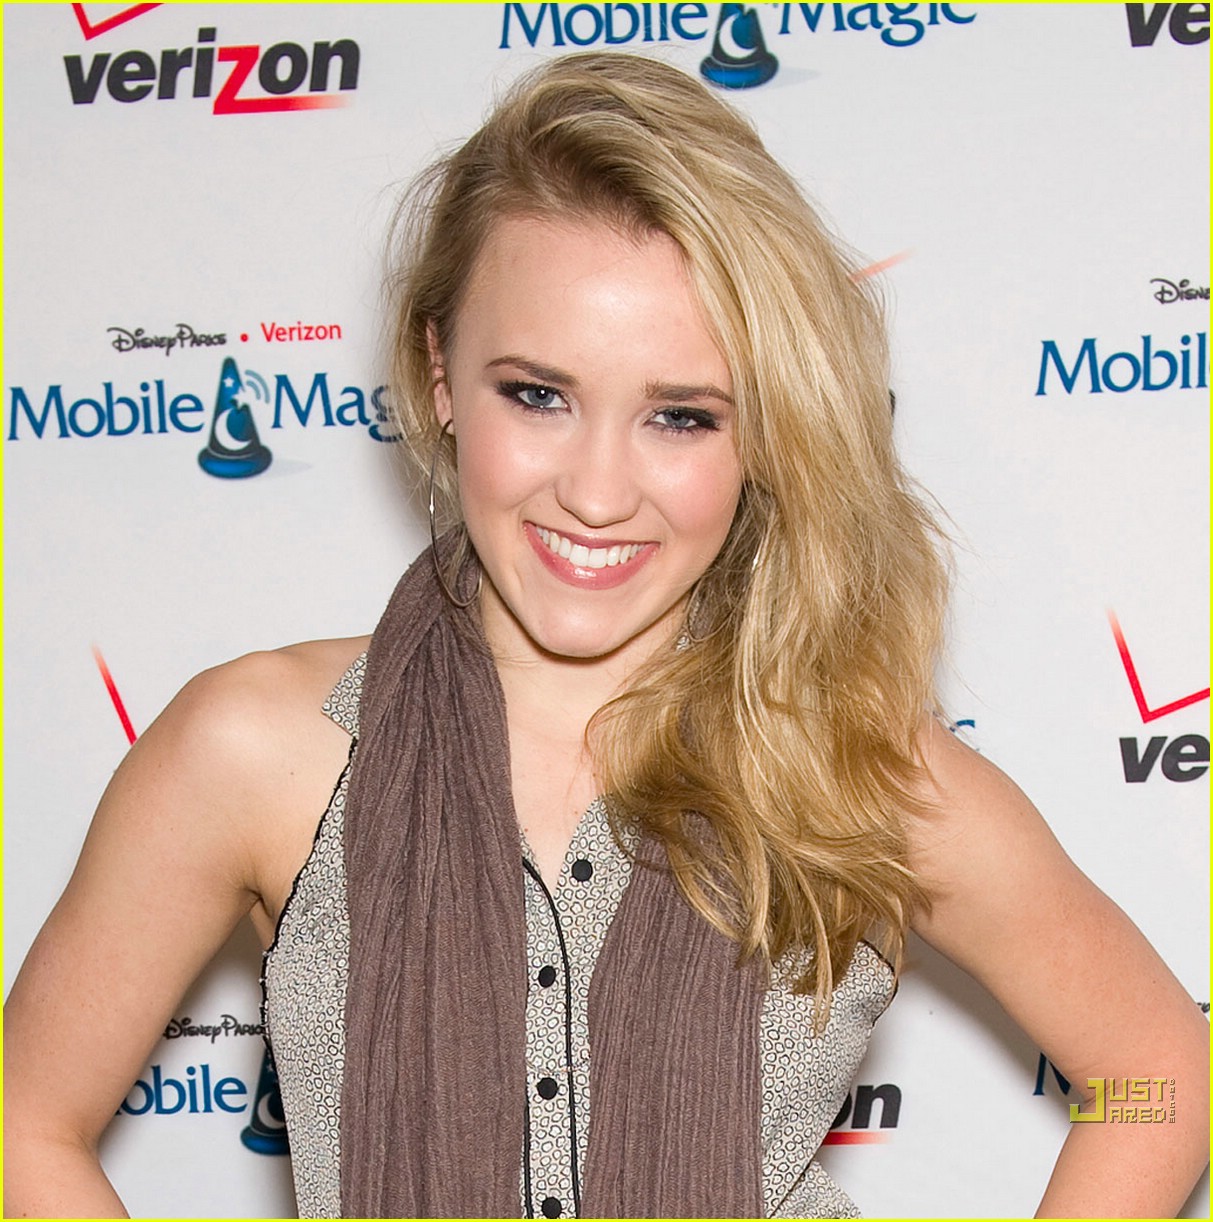 emily osment experiences the magic 05